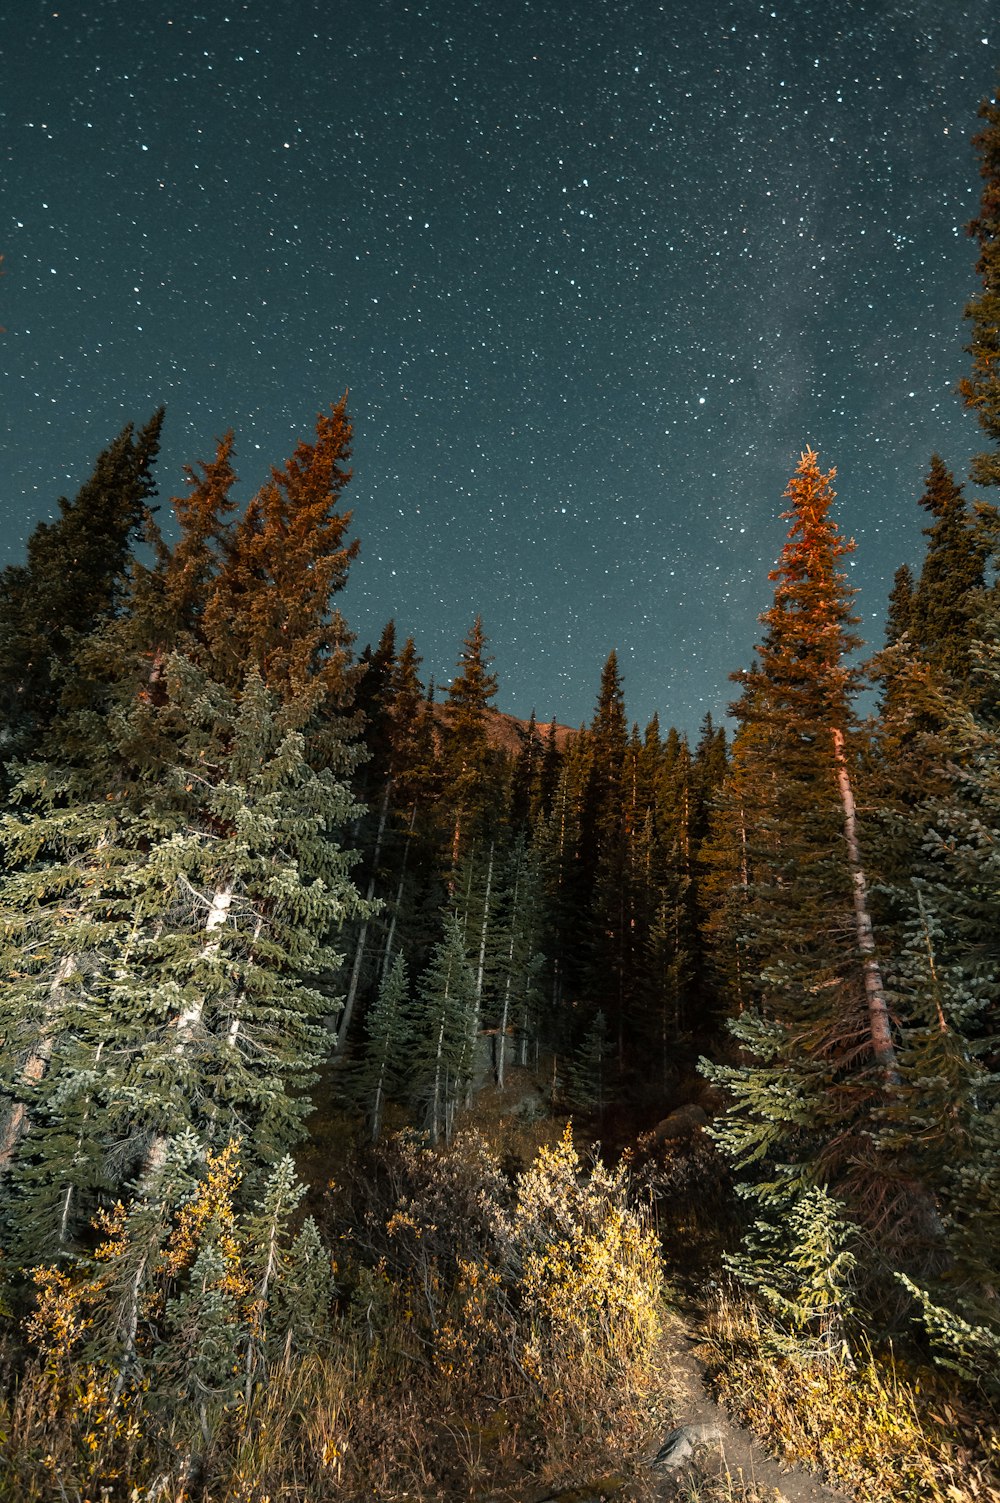 the night sky with stars above a forest